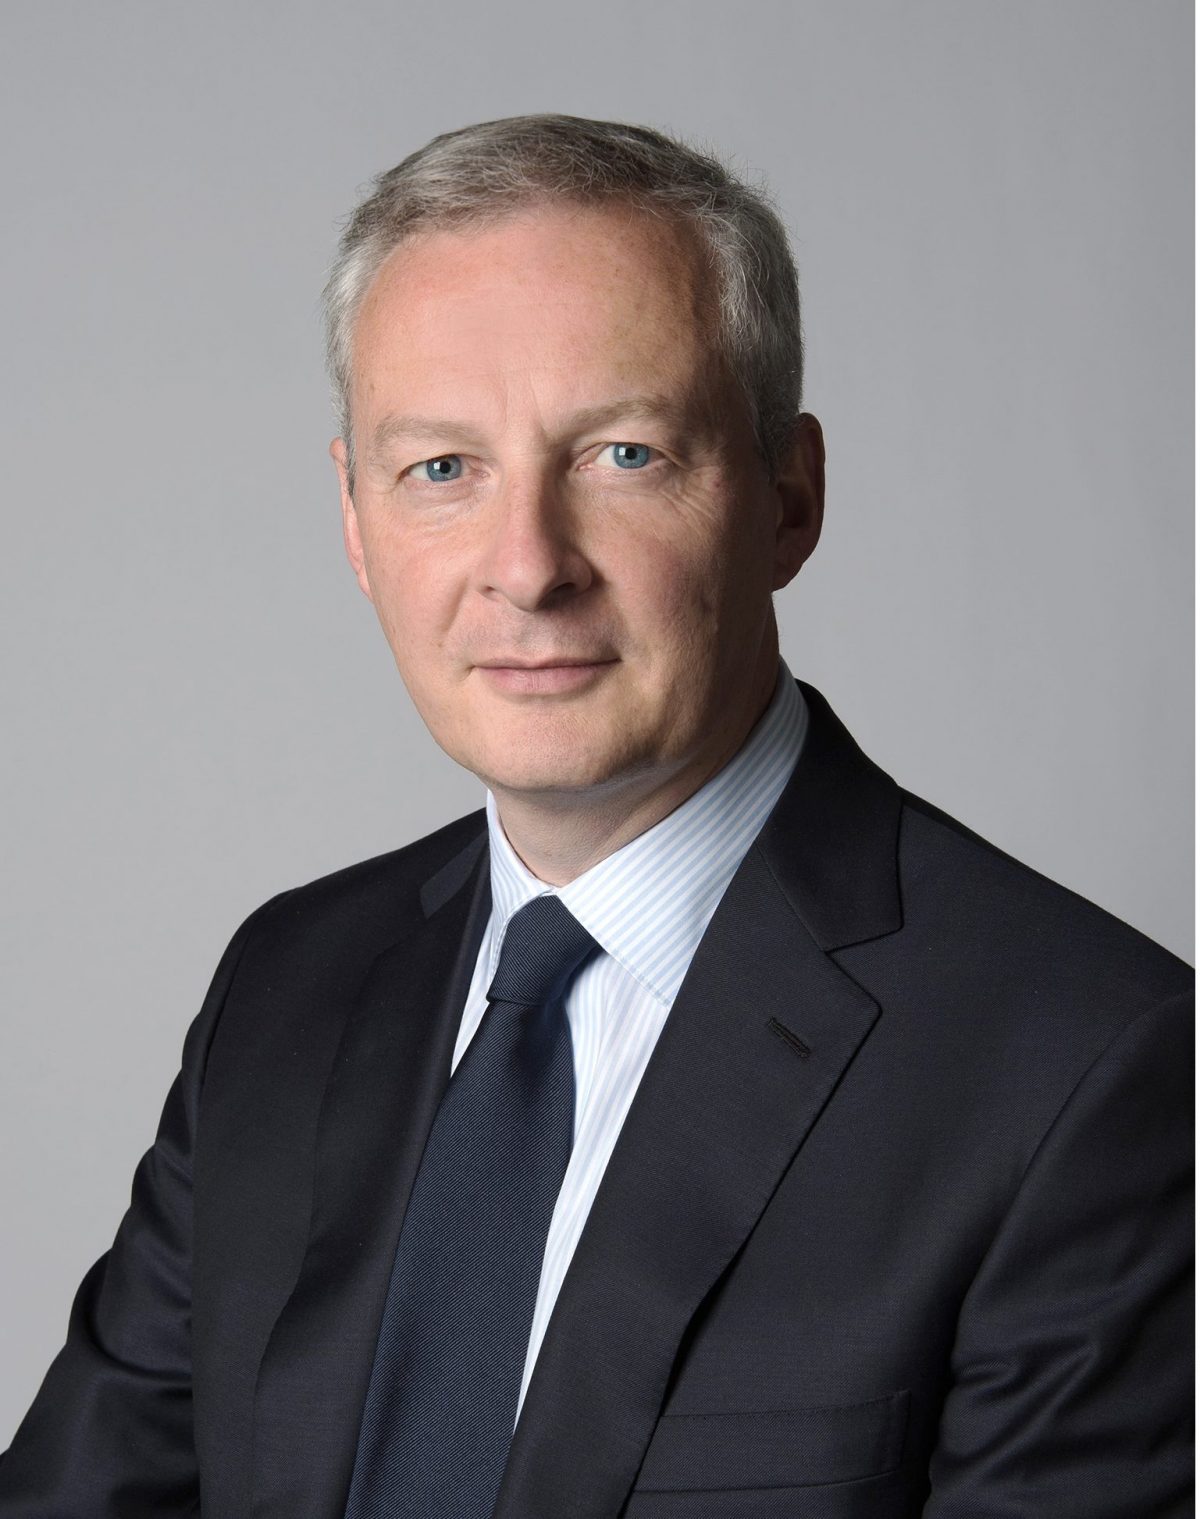 French Finance Minister Bruno Le Maire